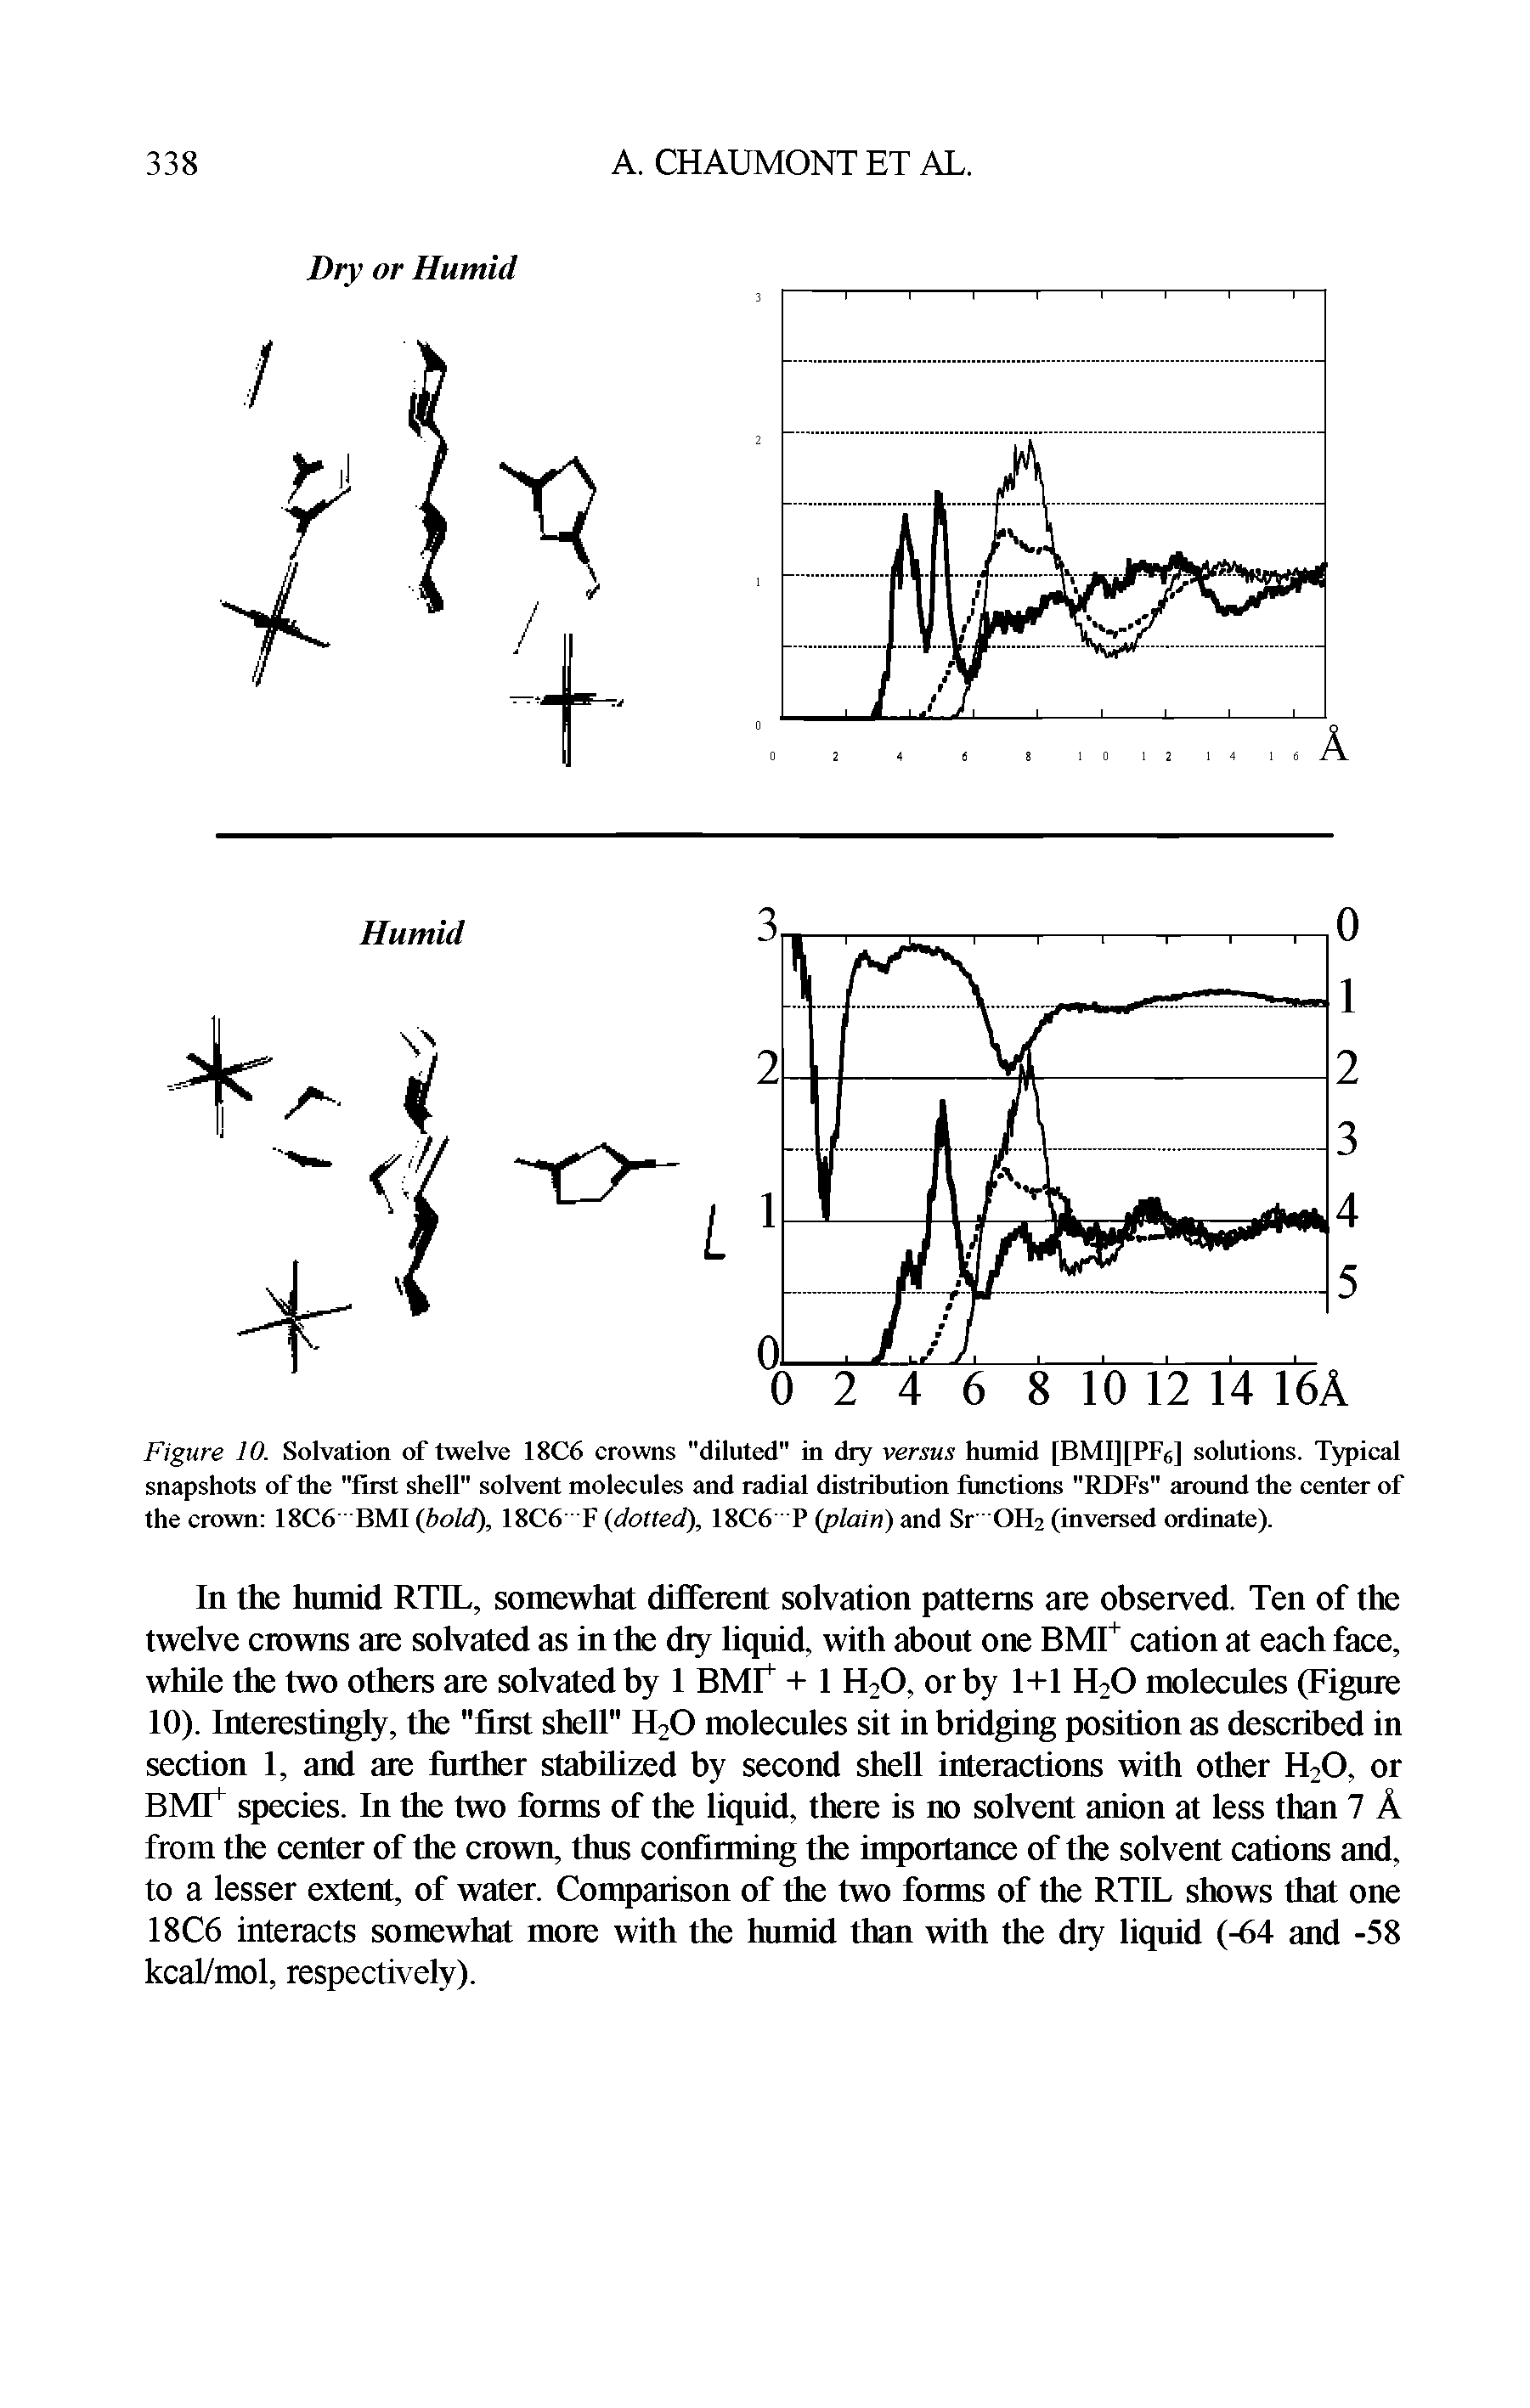 Figure 10. Solvation of twelve 18C6 crowns "diluted" in dry versus humid [BMI][PF6] solutions. Typical snapshots of die "first shell" solvent molecules and radial distribution functions "RDFs" around the center of the crown 18C6 BMI (bold), 18C6 F (dotted), 18C6 P (plain) and Sr OH2 (inversed ordinate).